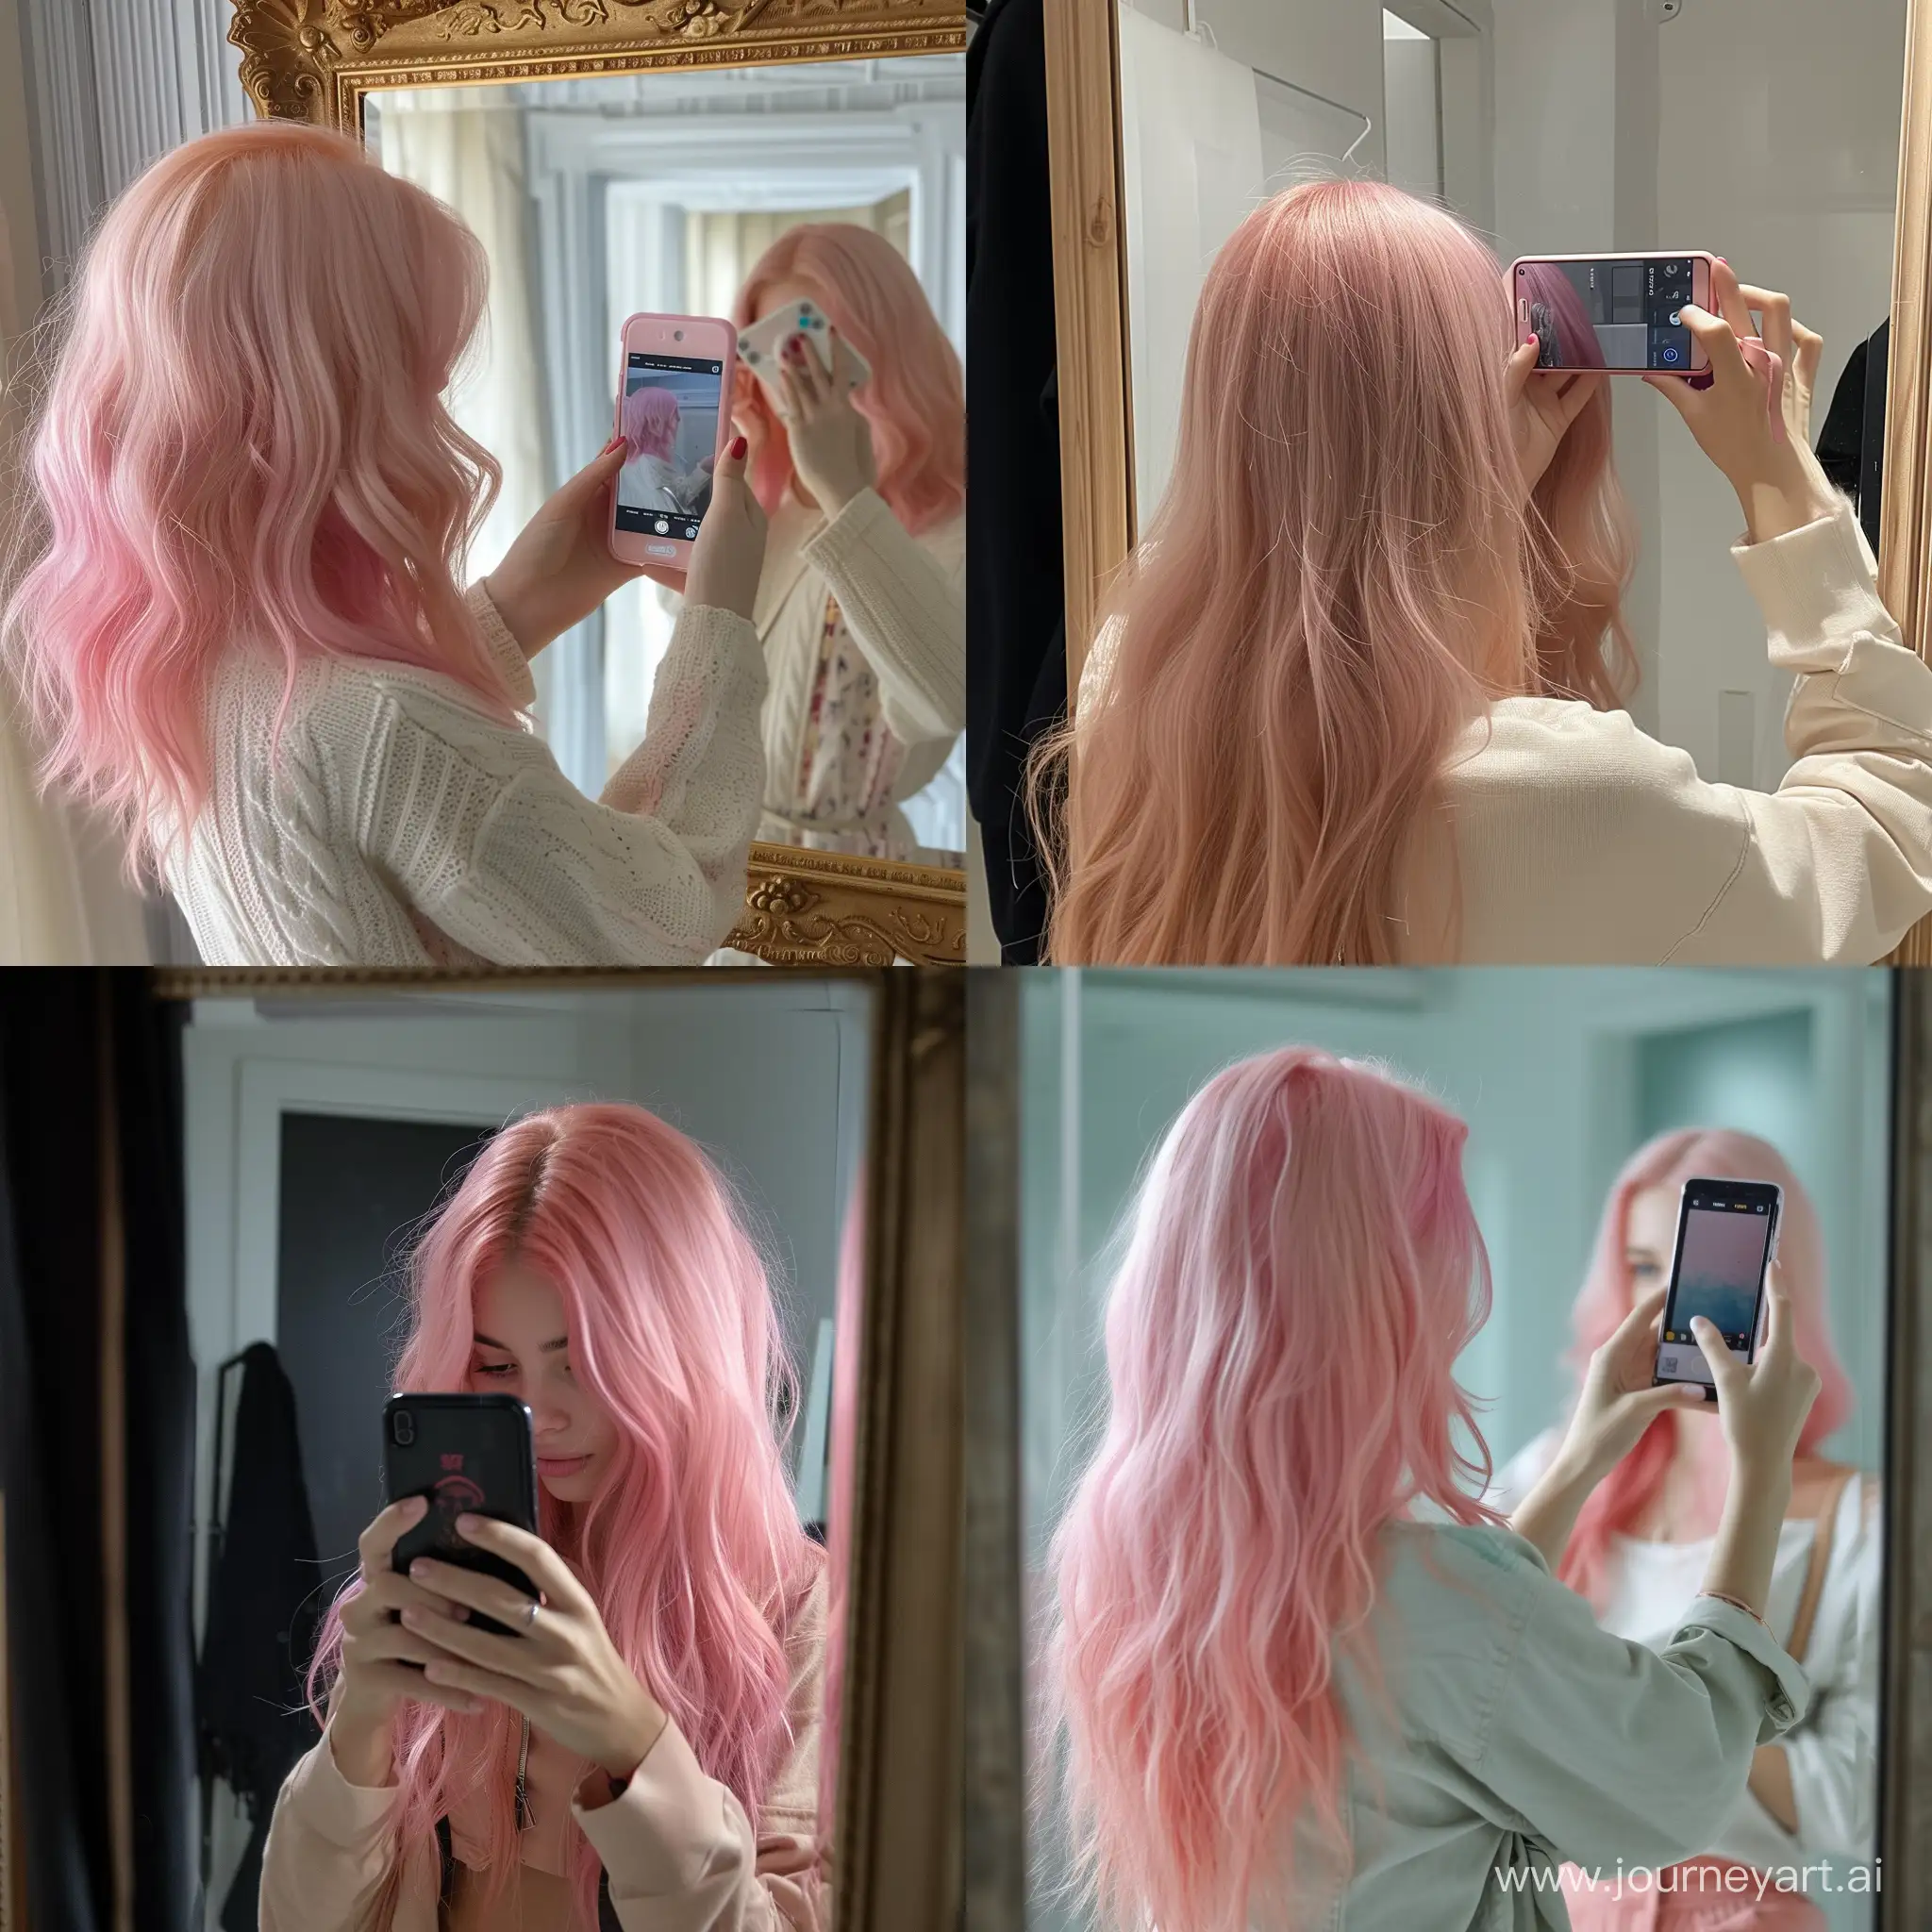 Stylish-PinkHaired-Girl-Capturing-Mirror-Moment-with-Phone